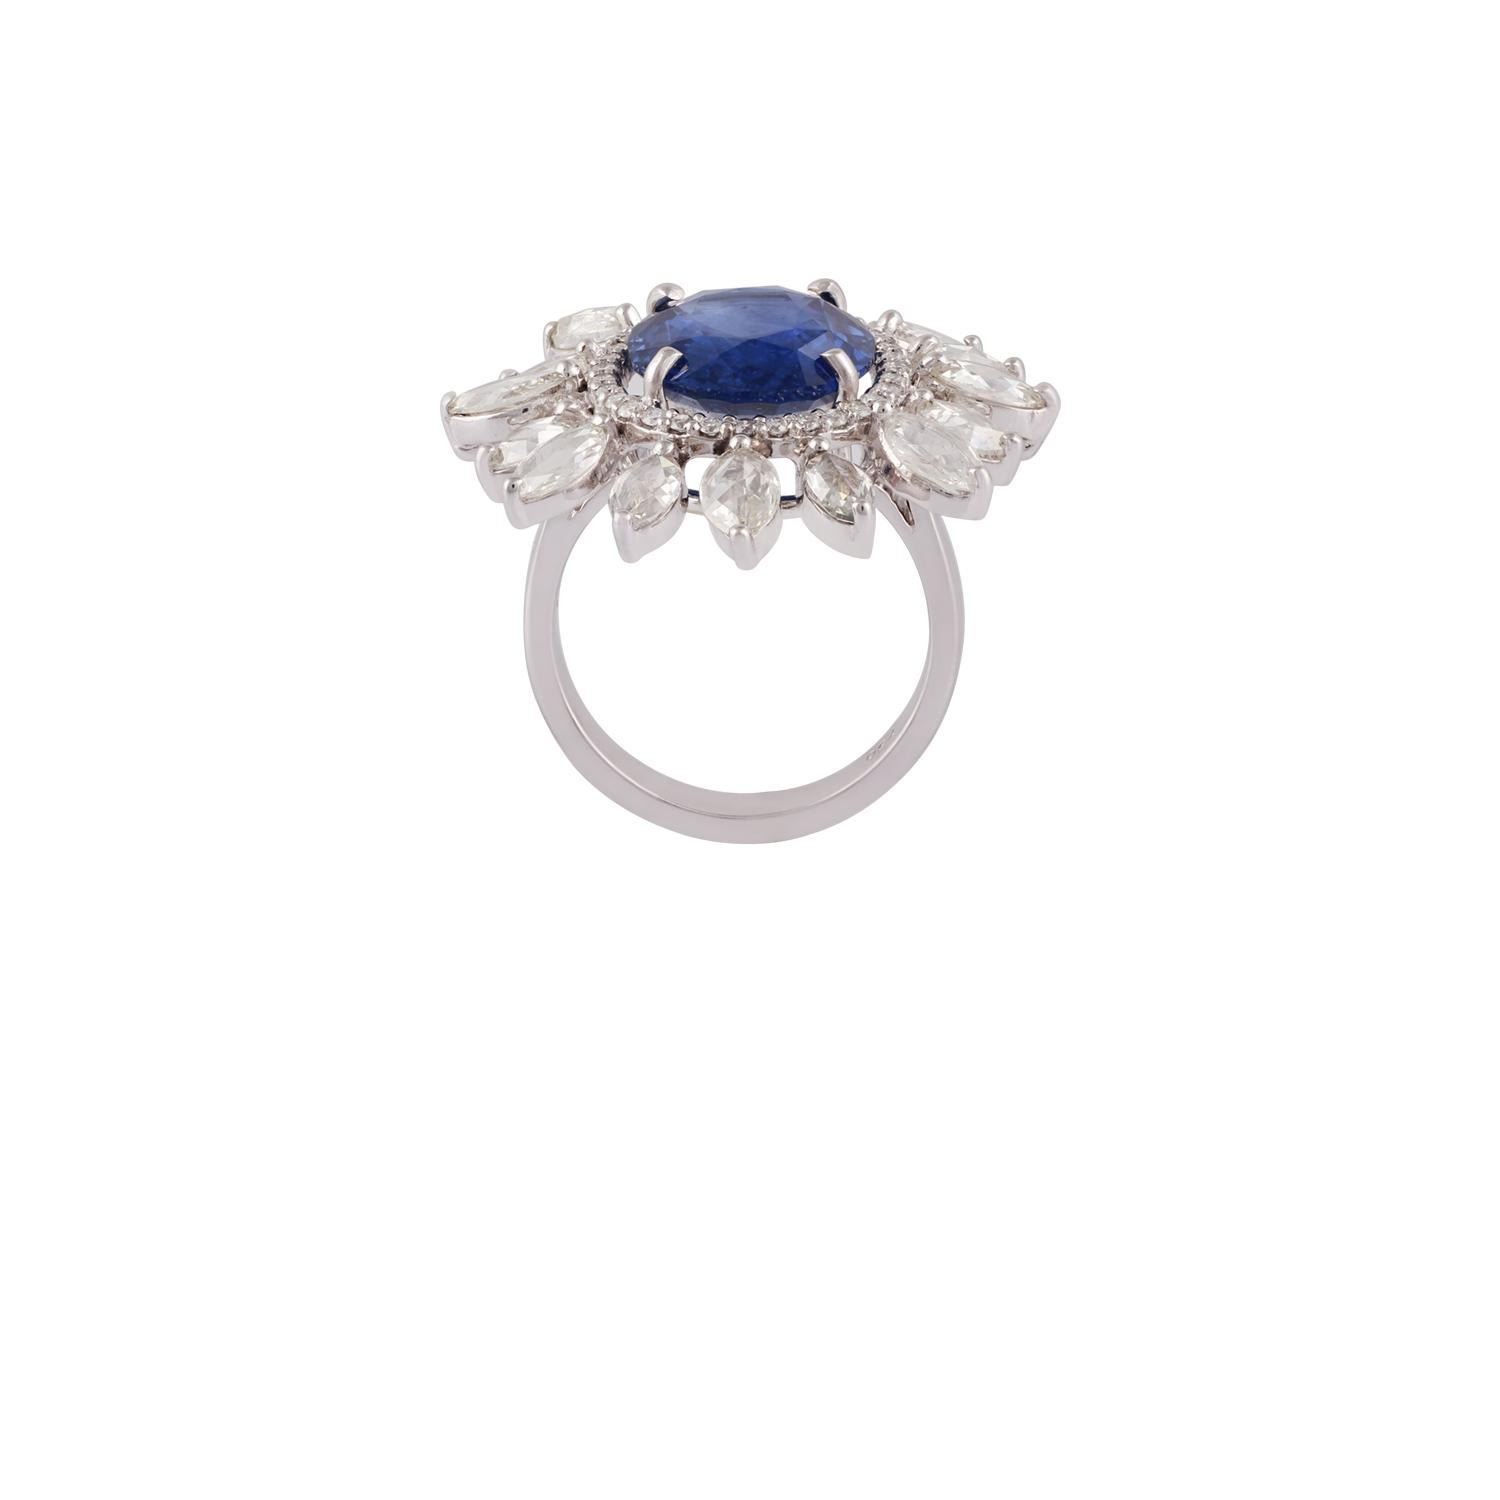 Contemporary 6.37 Carat Blue Sapphire & Diamond Ring Studded in 18k Gold